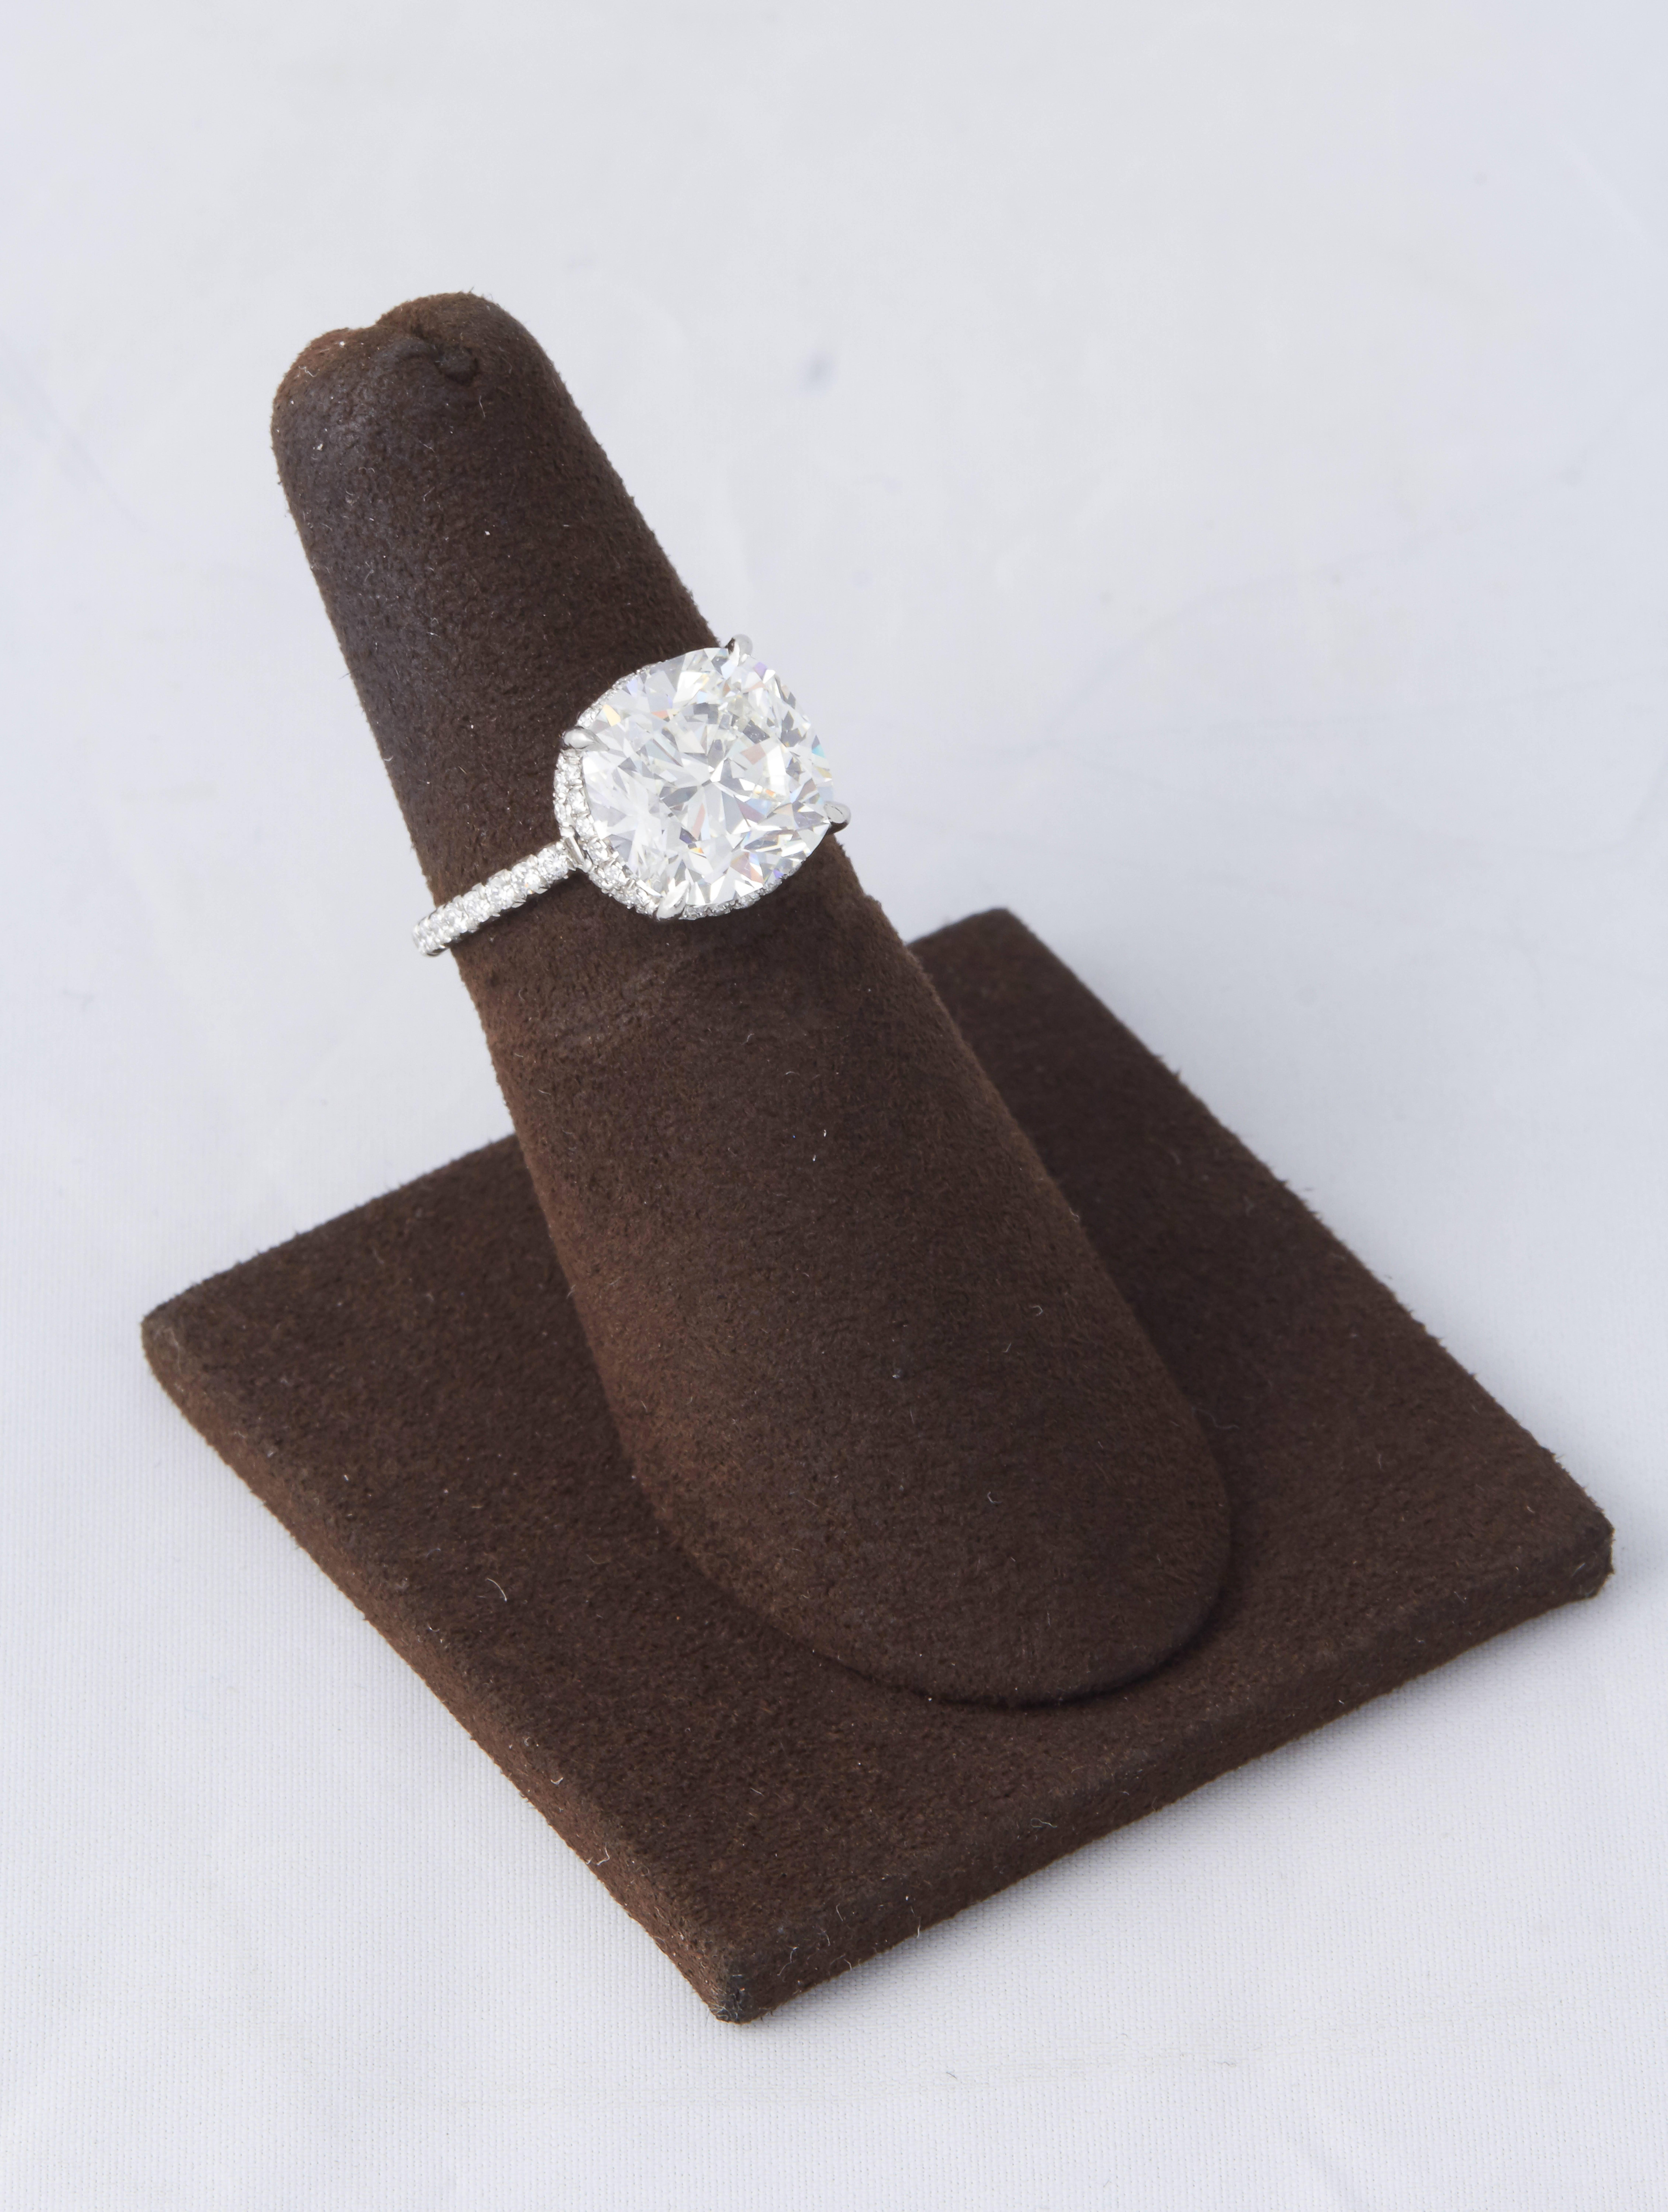 

A beautiful and striking diamond set in an elegant delicate diamond mounting. 

5.01 Cushion Brilliant cut GIA certified H color VS1 clarity diamond. 

A unique cut, this cushion brilliant is full of life and sparkle.

The platinum diamond